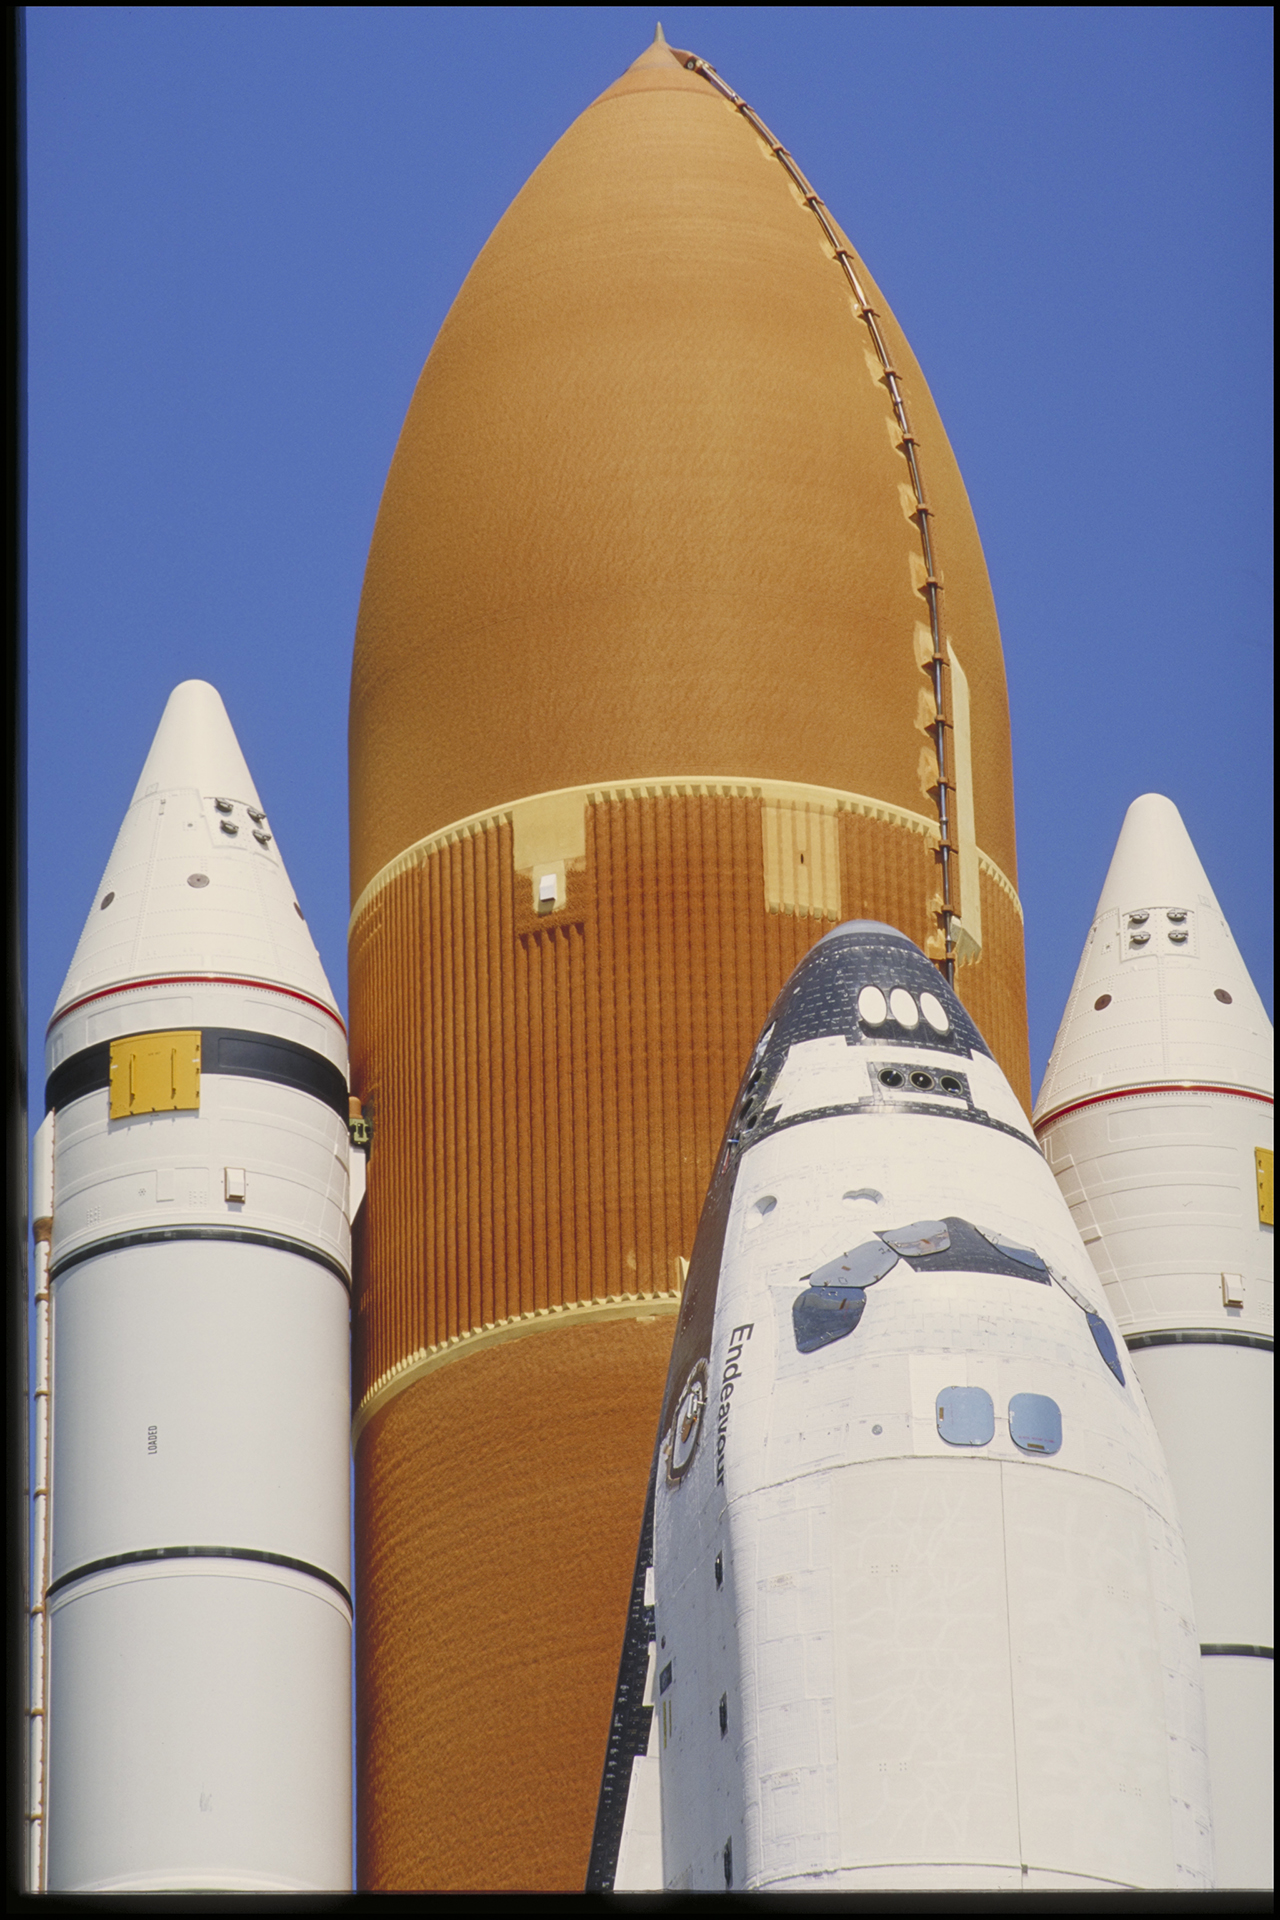 The structural backbone of every shuttle takeoff, the tanks were the largest component of each shuttle at 154 feet in length—longer than the Statue of Liberty—and were composed of nearly a half-million parts. The external tank that launched Columbia’s first mission in 1981 weighed nearly 76,000 pounds, but by 1998 Lockheed Martin had developed the Super Lightweight Tank, lowering the weight of the external tank to approximately 58,500 pounds. This change in design and the shift to a lighter aluminum-lithium alloy made it possible for shuttles to carry greater payloads, a breakthrough that allowed the shuttle to deliver to orbit the construction modules that became the International Space Station.